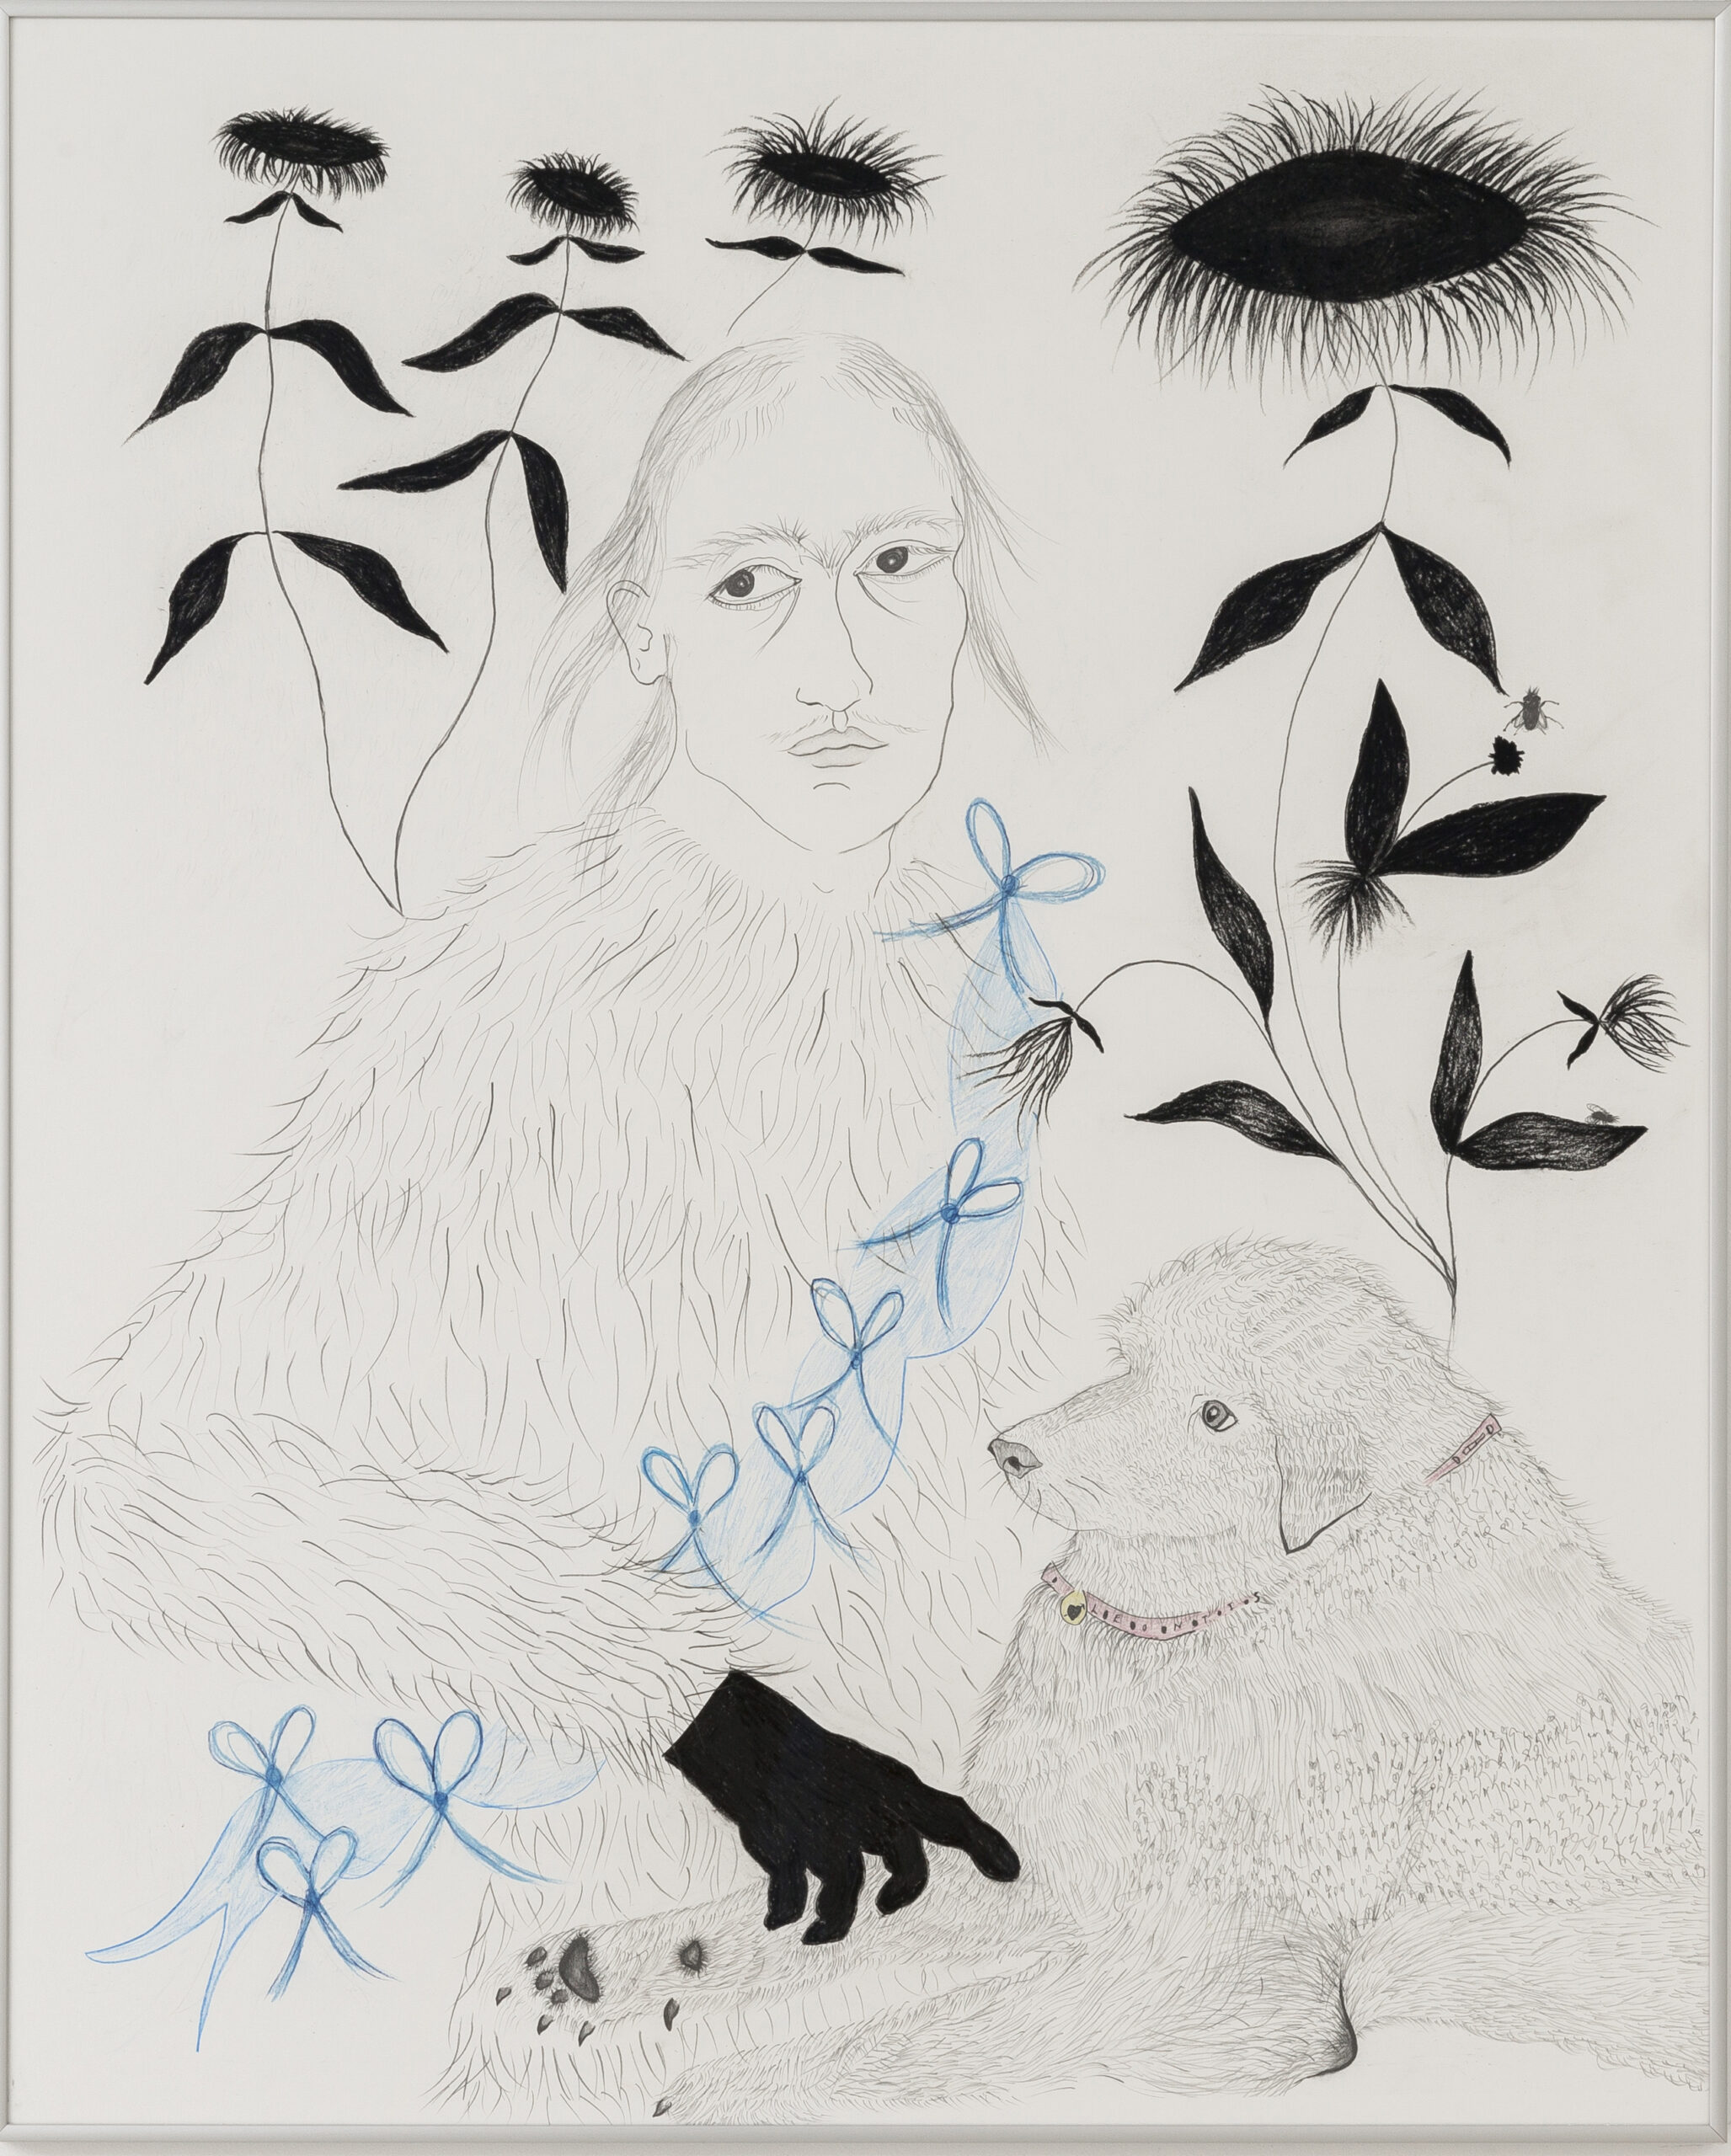 Evgenia Vereli, Me and my dog 2022, Pencil, charcoal & colored pencils on paper, 115 x 92 cm

